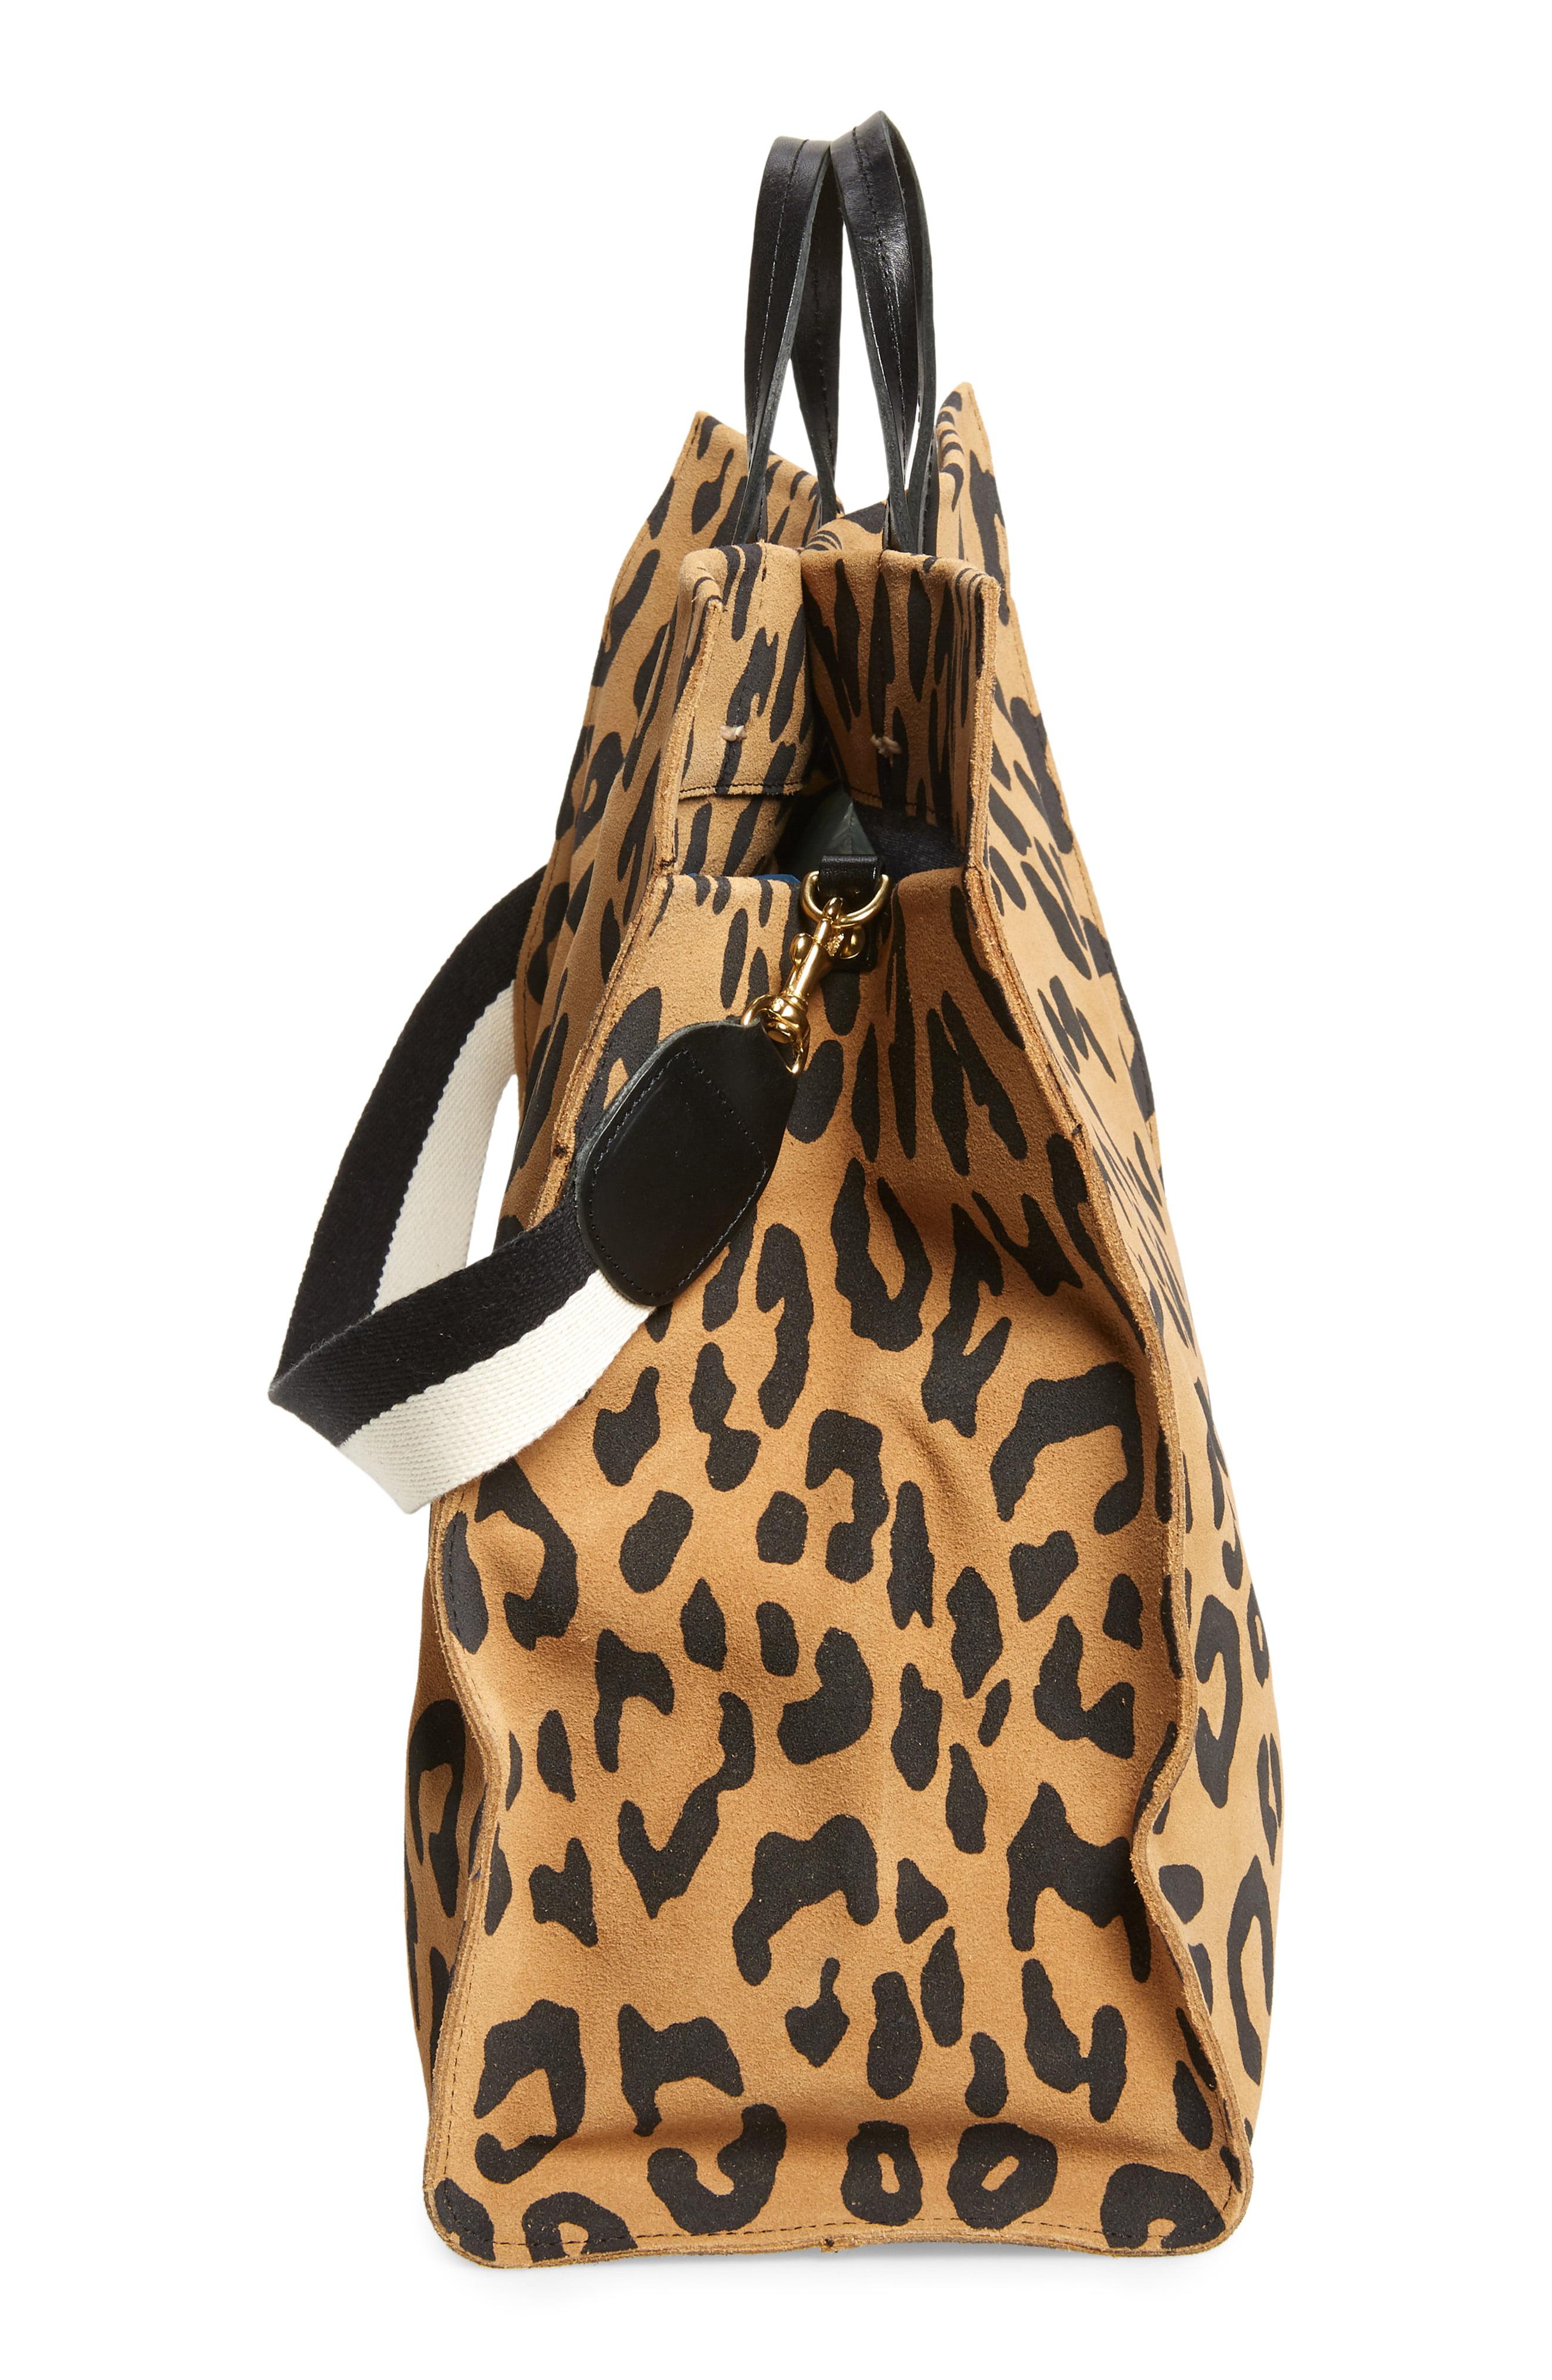 CLARE V. Women’s Simple Suede Leather Tote Bag Mini Cat Leopard Print $555  NEW